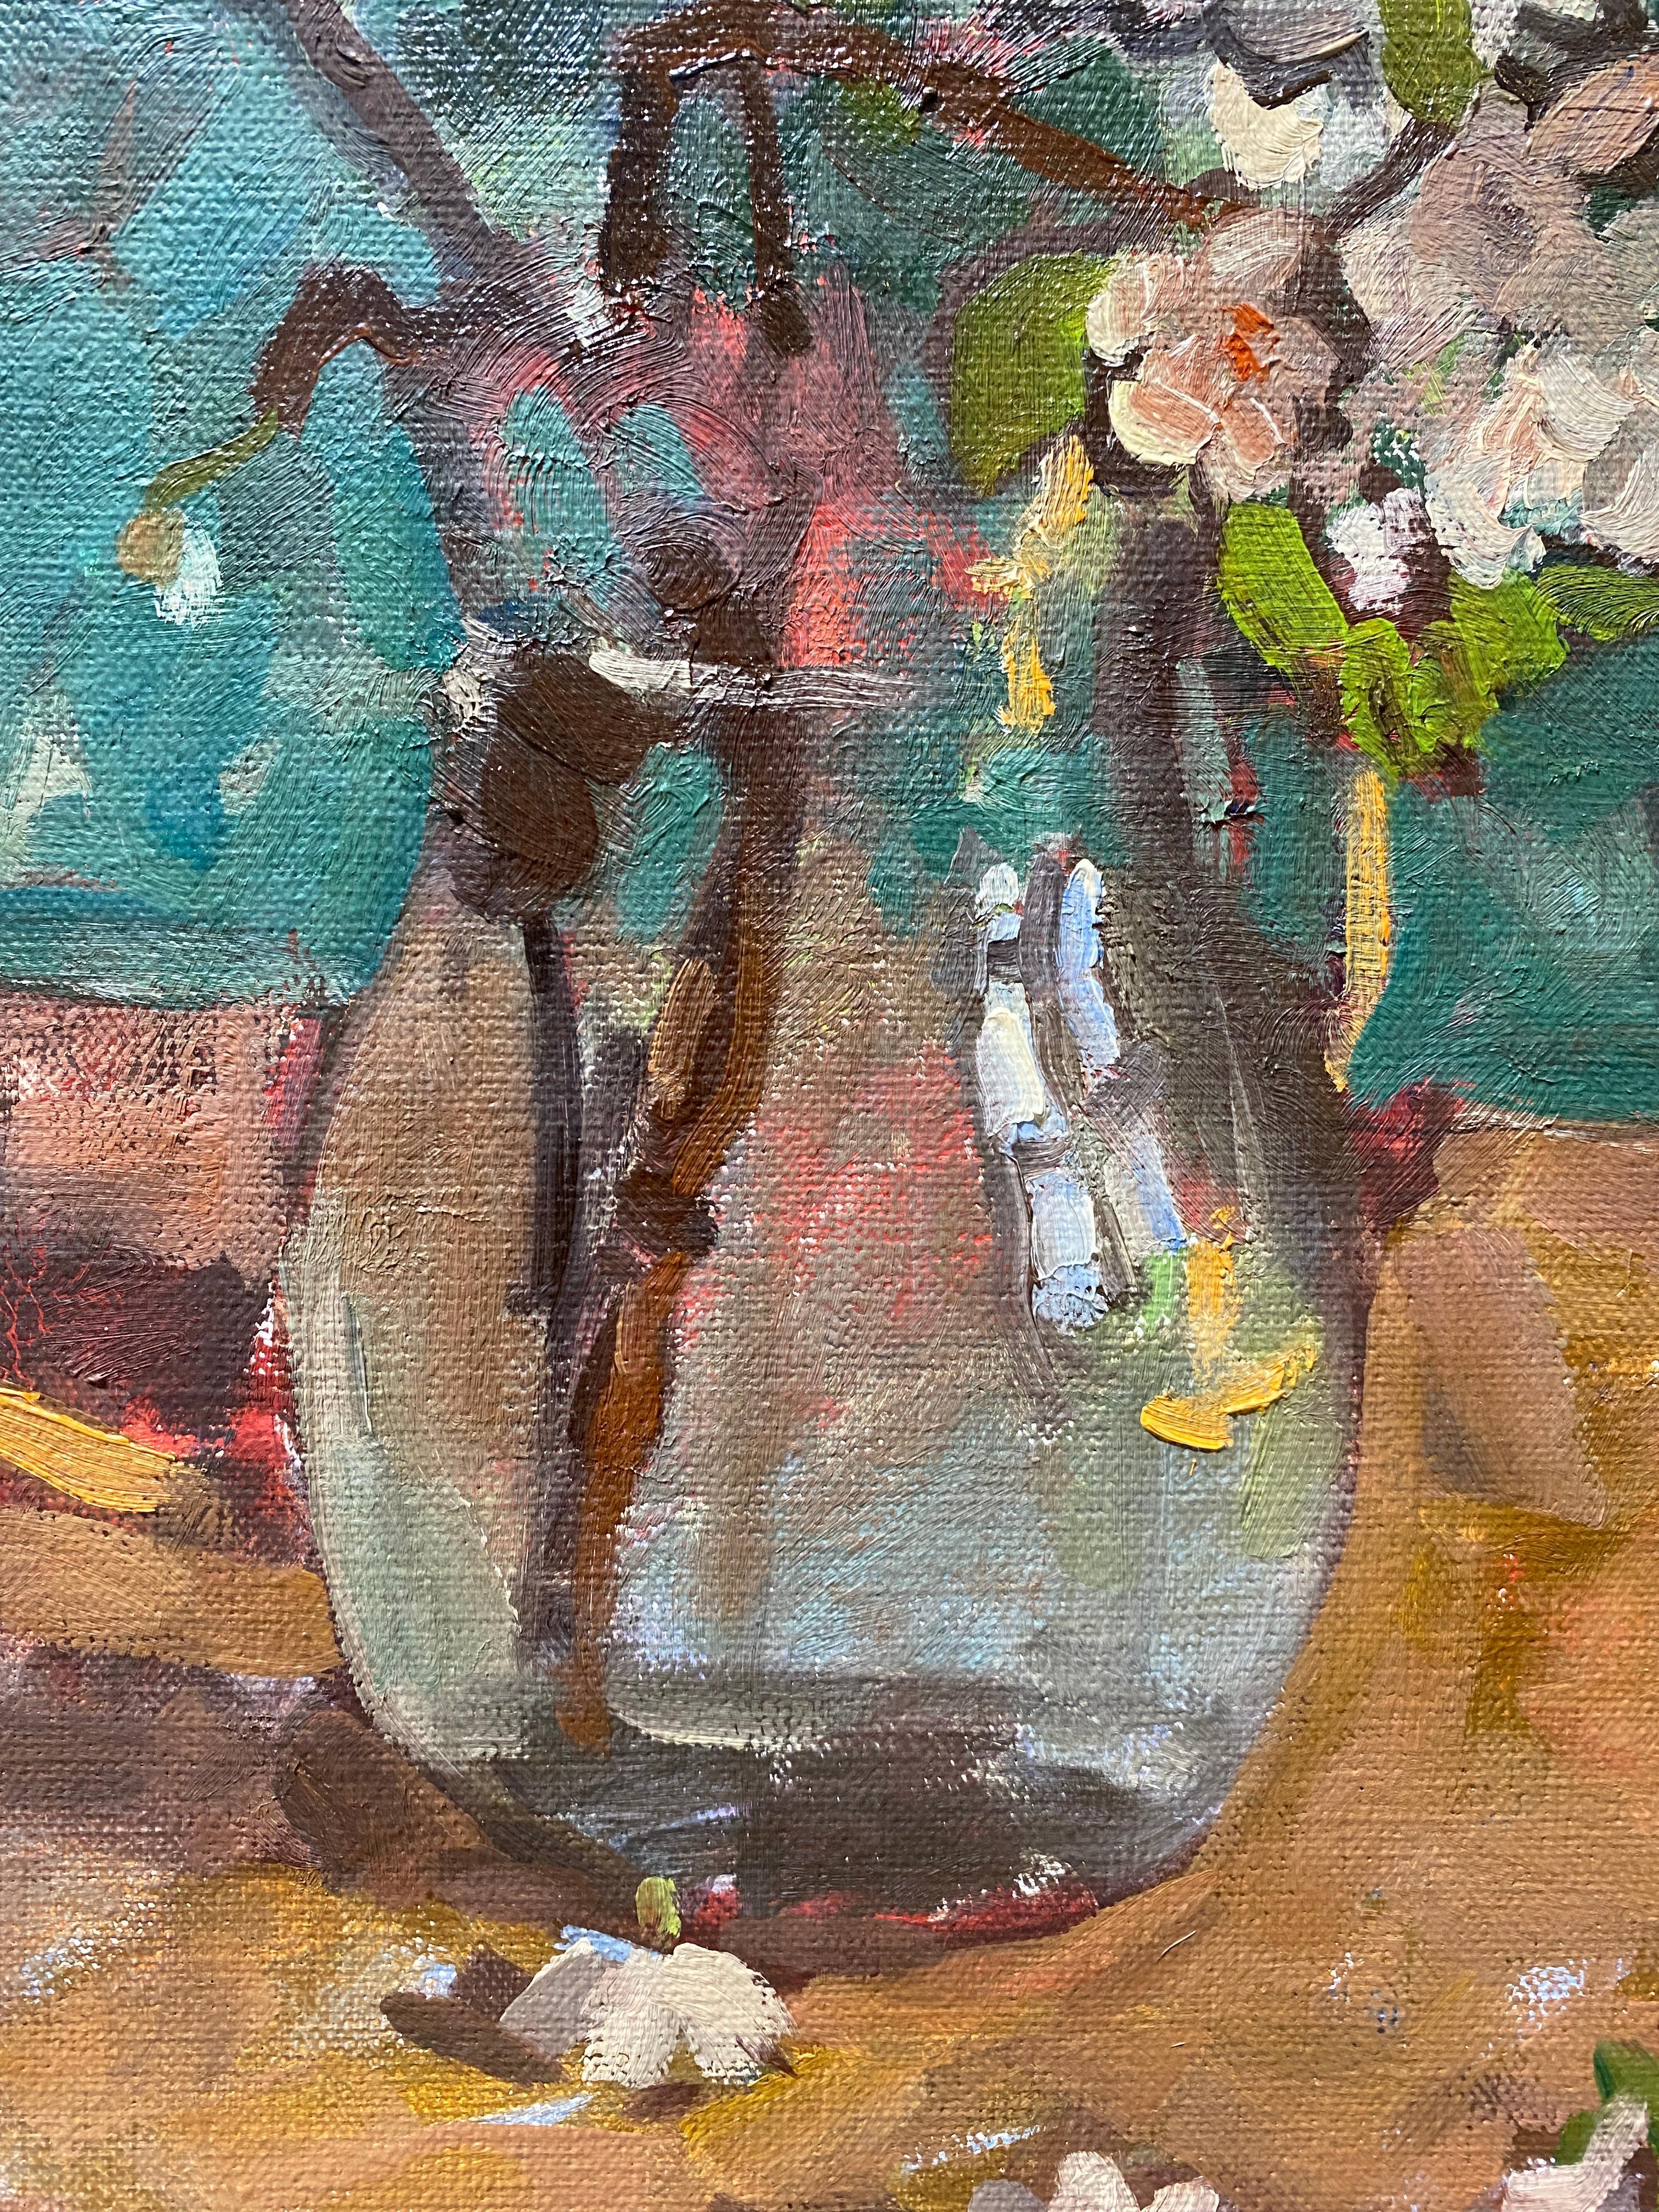 A still life oil painting of branches of pear blossoms, freshly cut and arranged in a glass pitcher of water. These spring blossoms flourish in small white petals, against curved brown branches. The flowers are set atop a wooden table, and in front